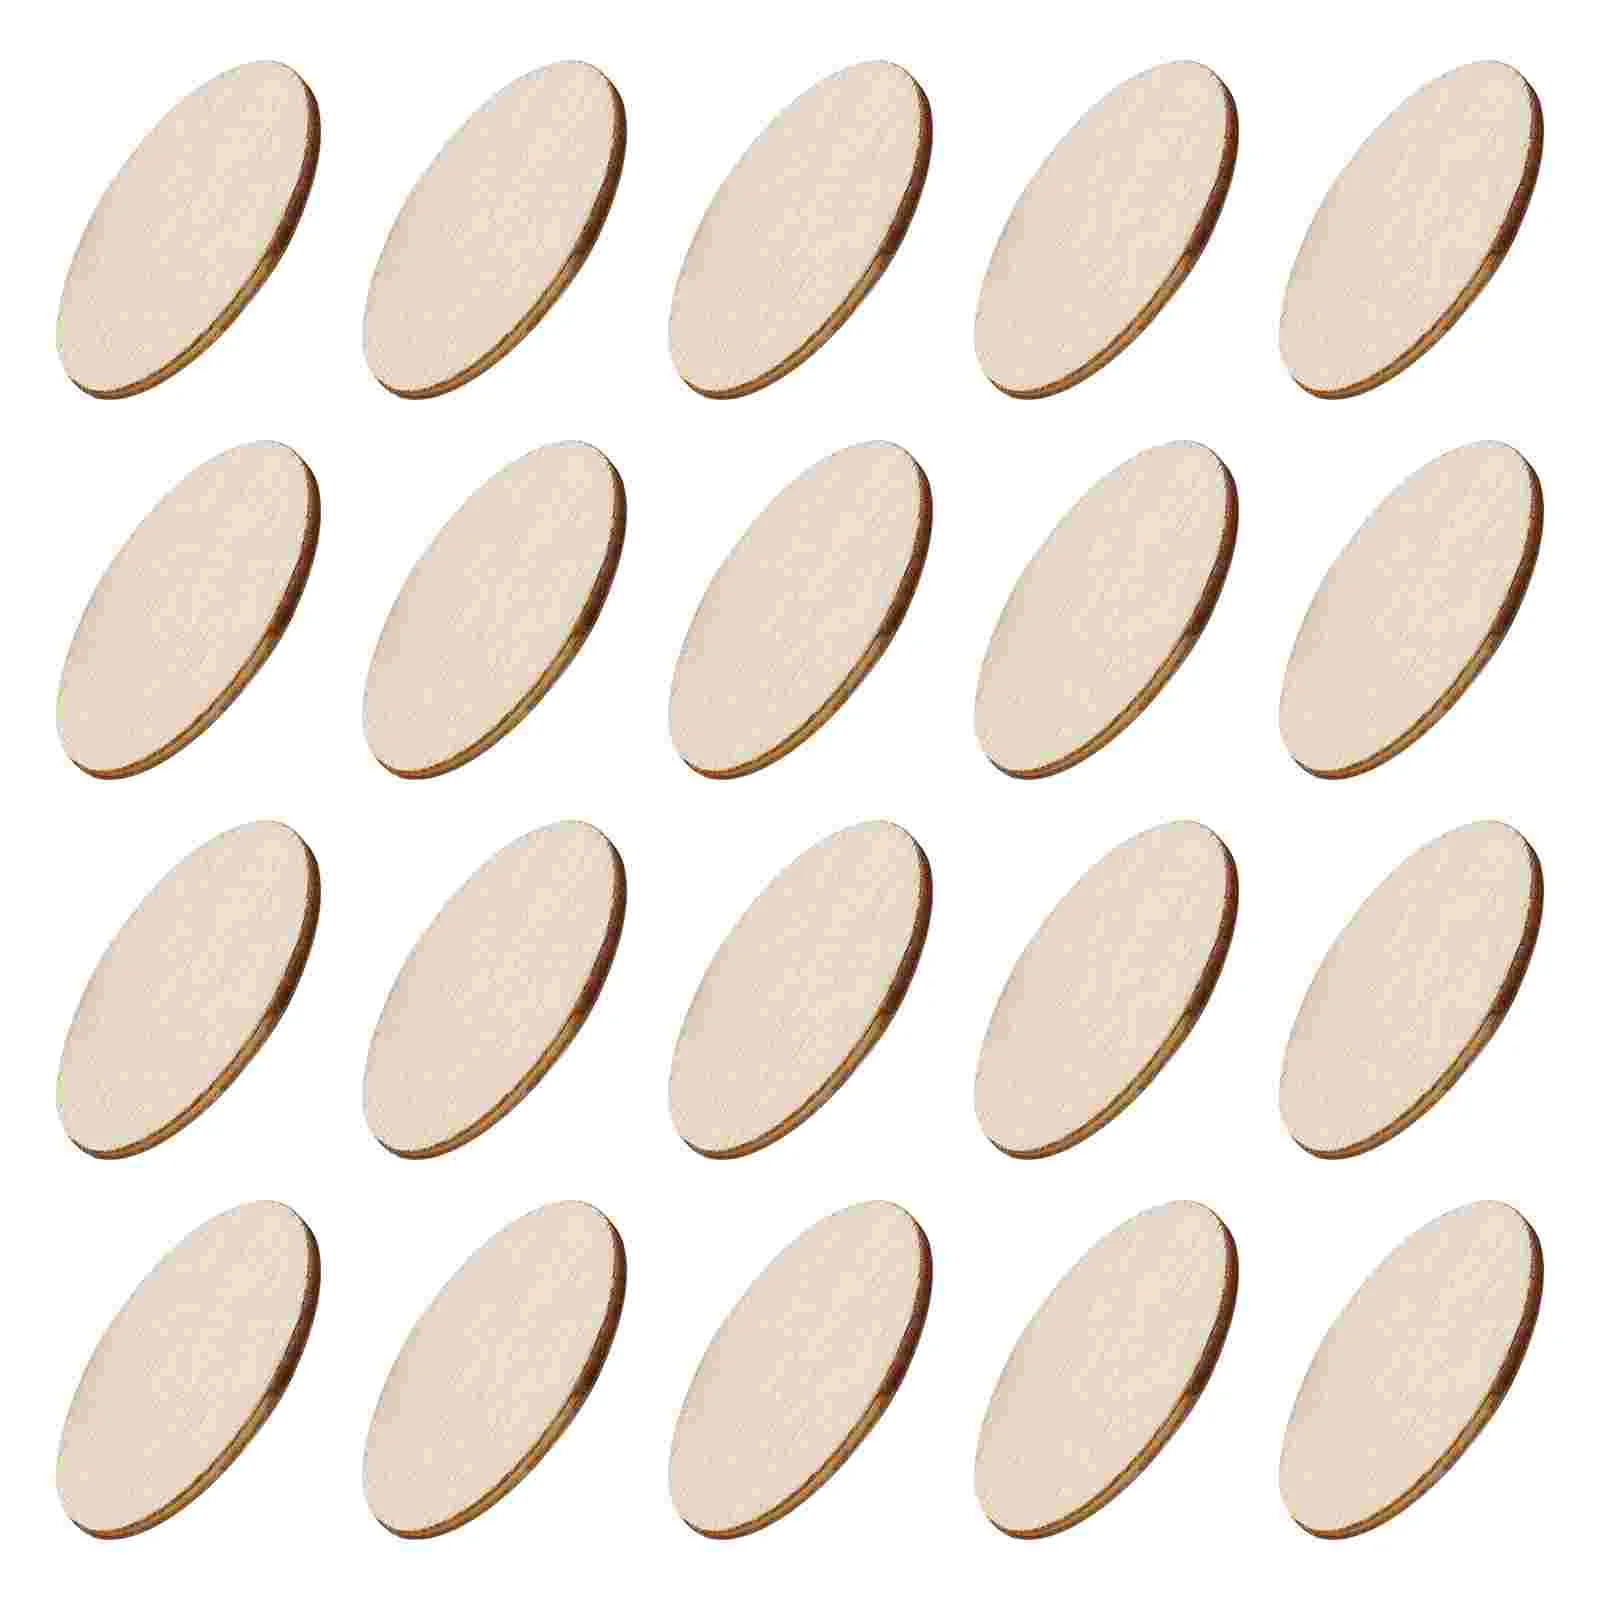 

NUOBESTY 200pcs Wooden Oval Cutouts Wood Slices Rustic Wooden Cutout Chips DIY Wood Craft Supplies for Handwork Decoration